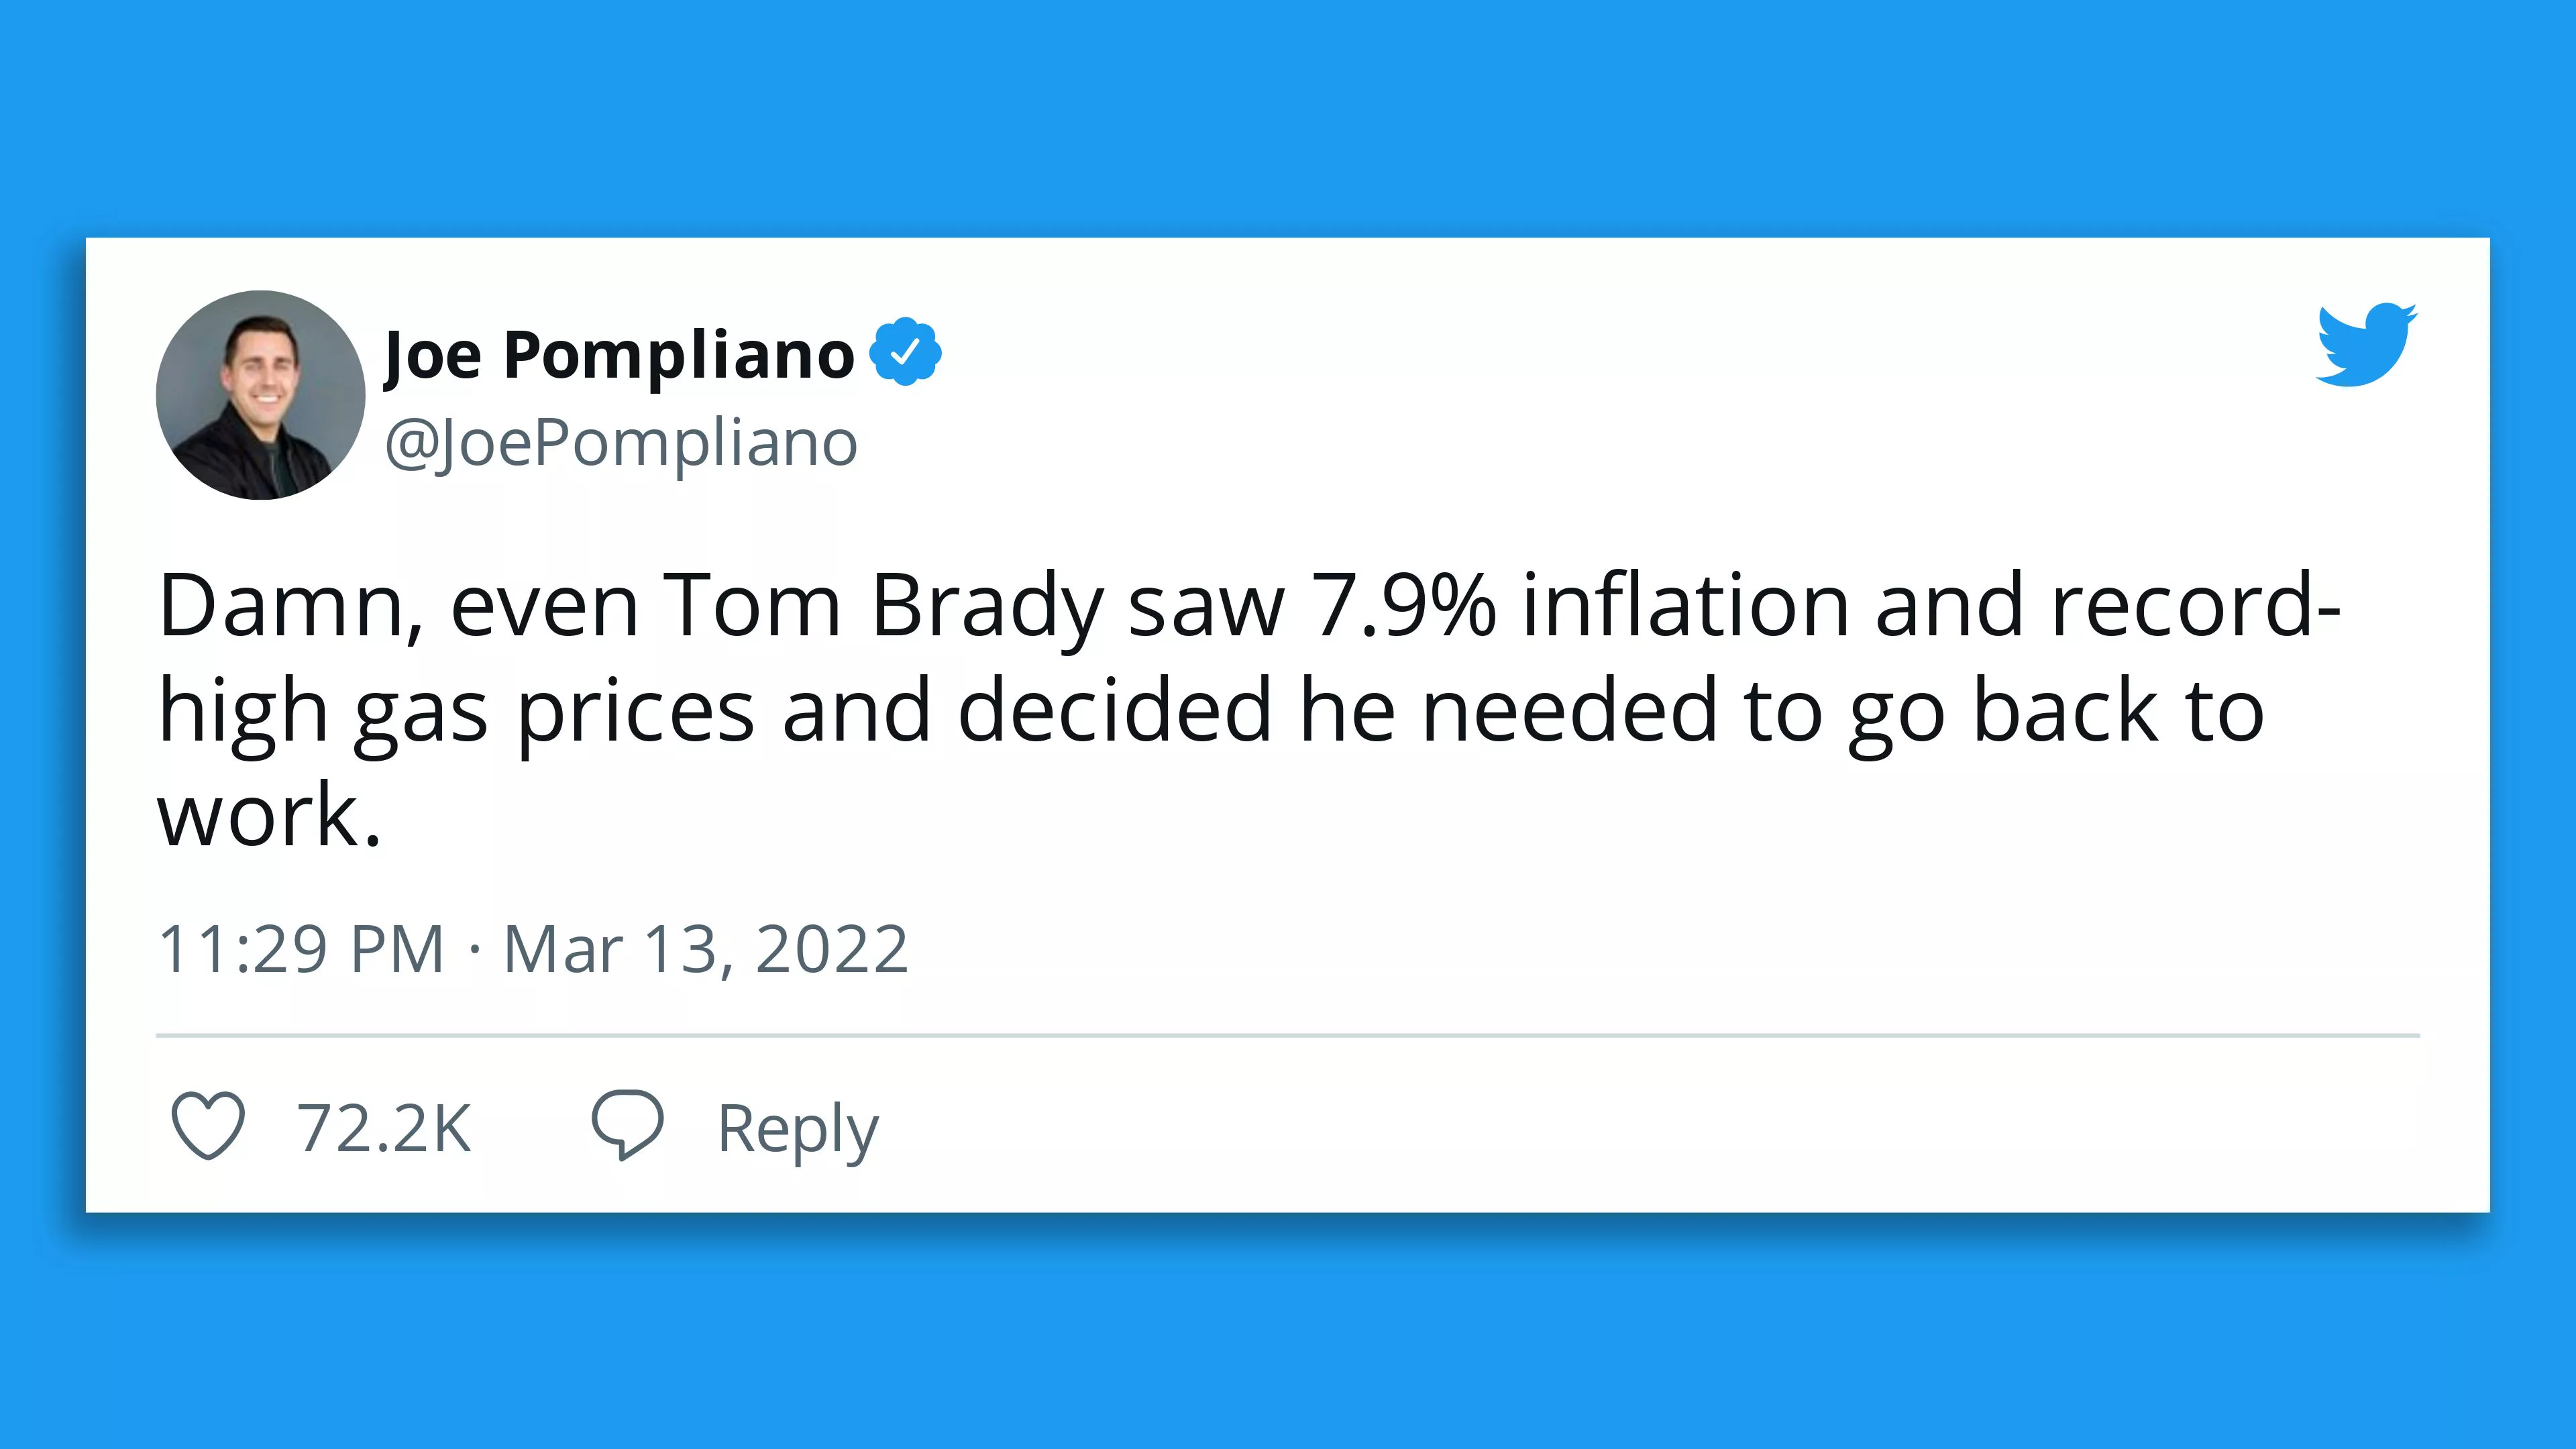 Screenshot of a tweet about Tom Brady needing to go back to work because of high gas prices